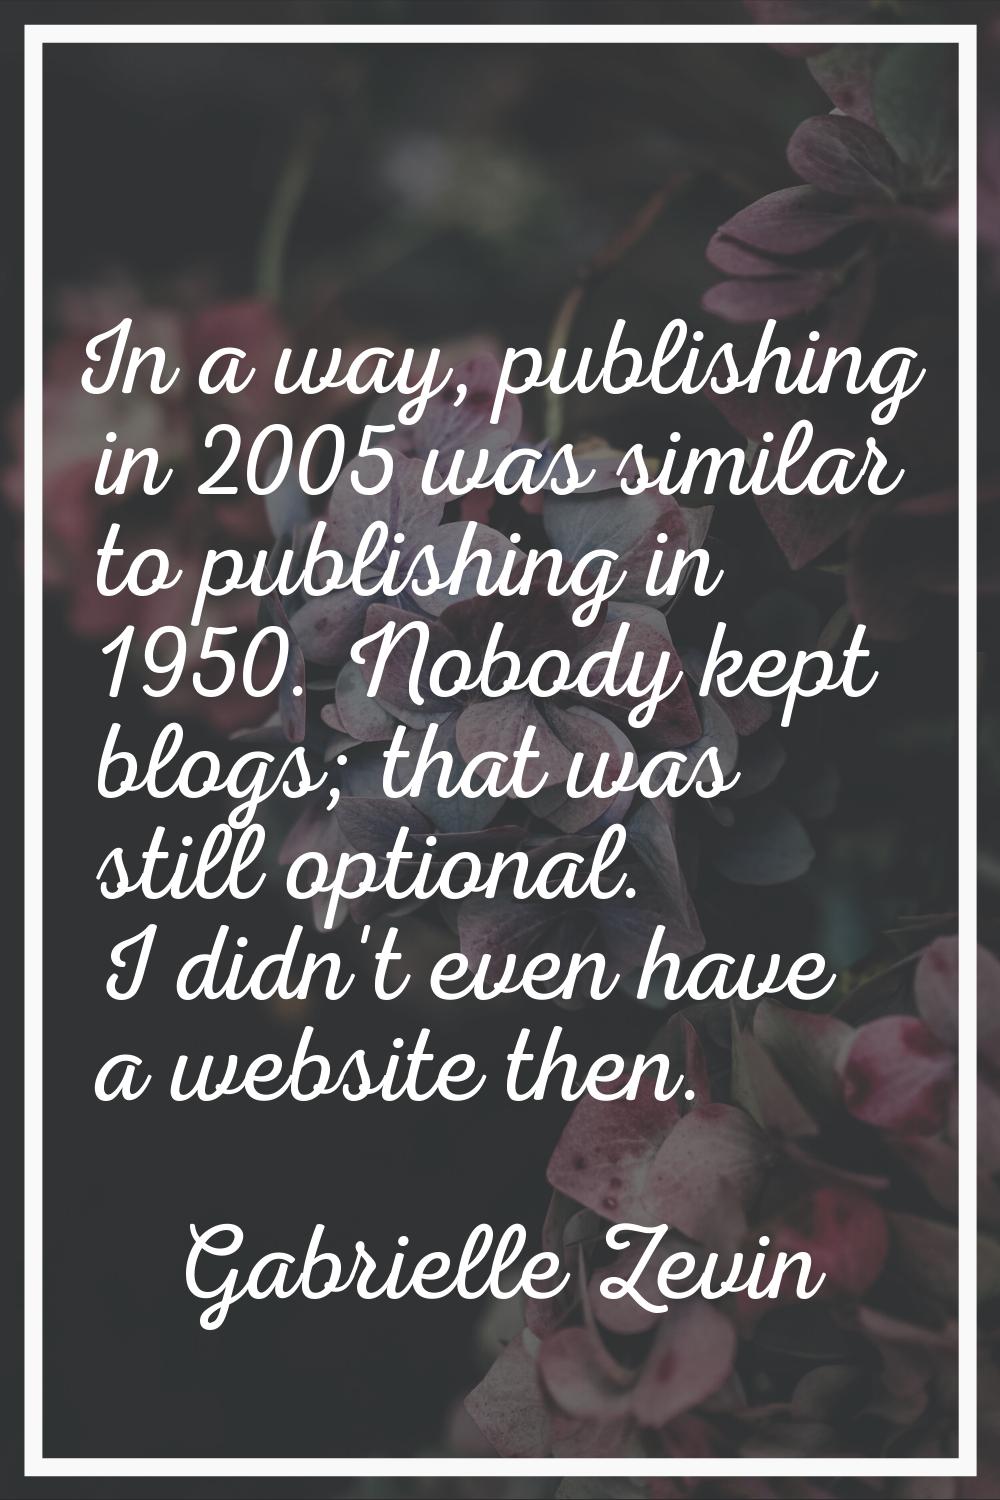 In a way, publishing in 2005 was similar to publishing in 1950. Nobody kept blogs; that was still o